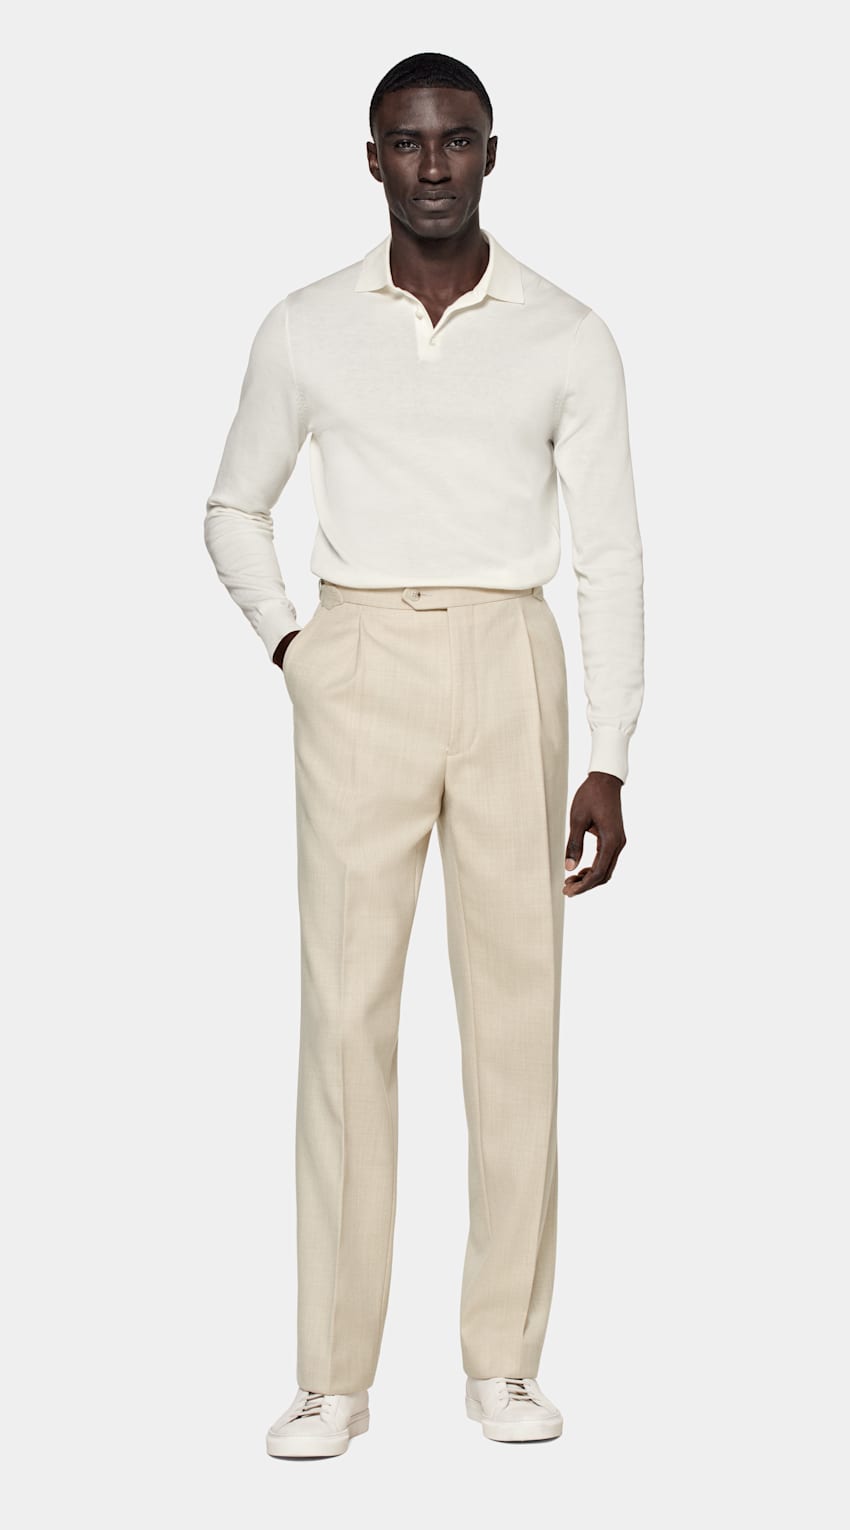 SUITSUPPLY Californian Cotton & Mulberry Silk Off-White Long Sleeve Polo Shirt 